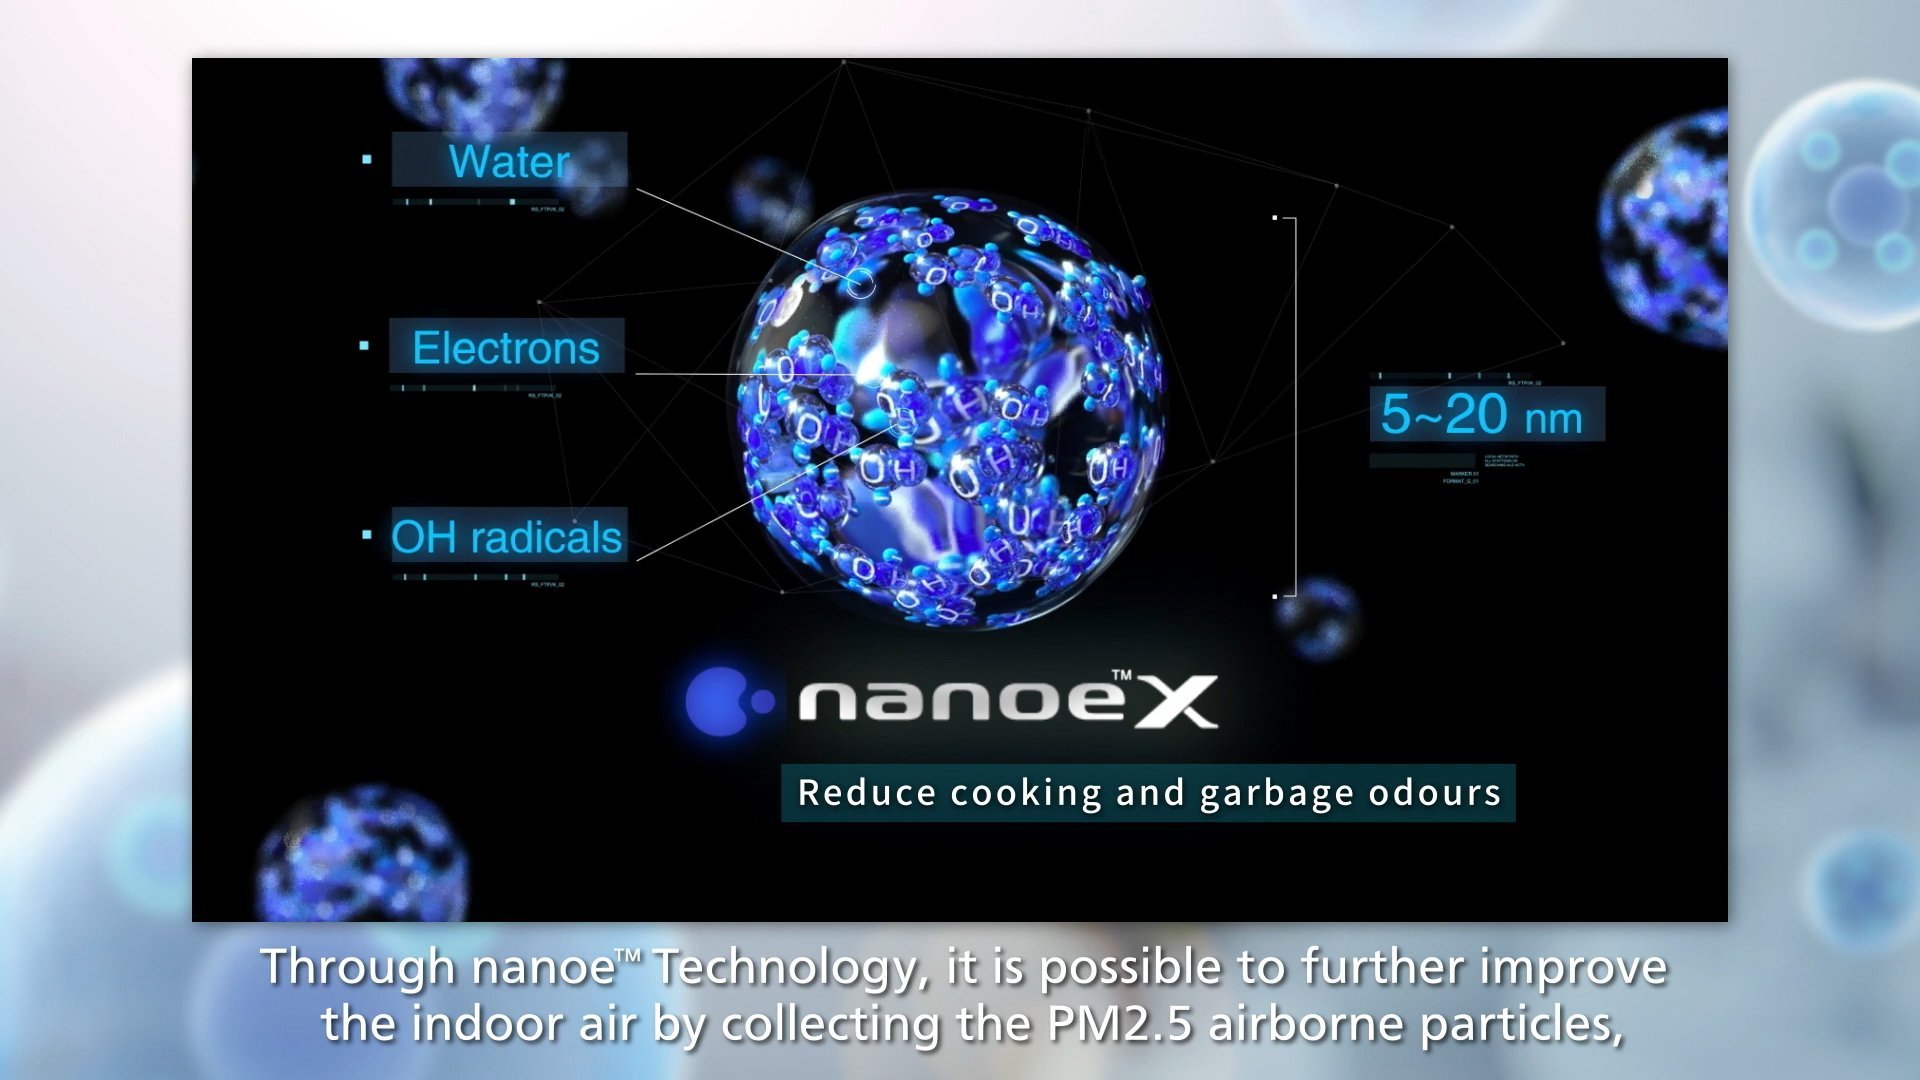 nanoe™ technology has proven effective in inhibiting various pollutants in the air